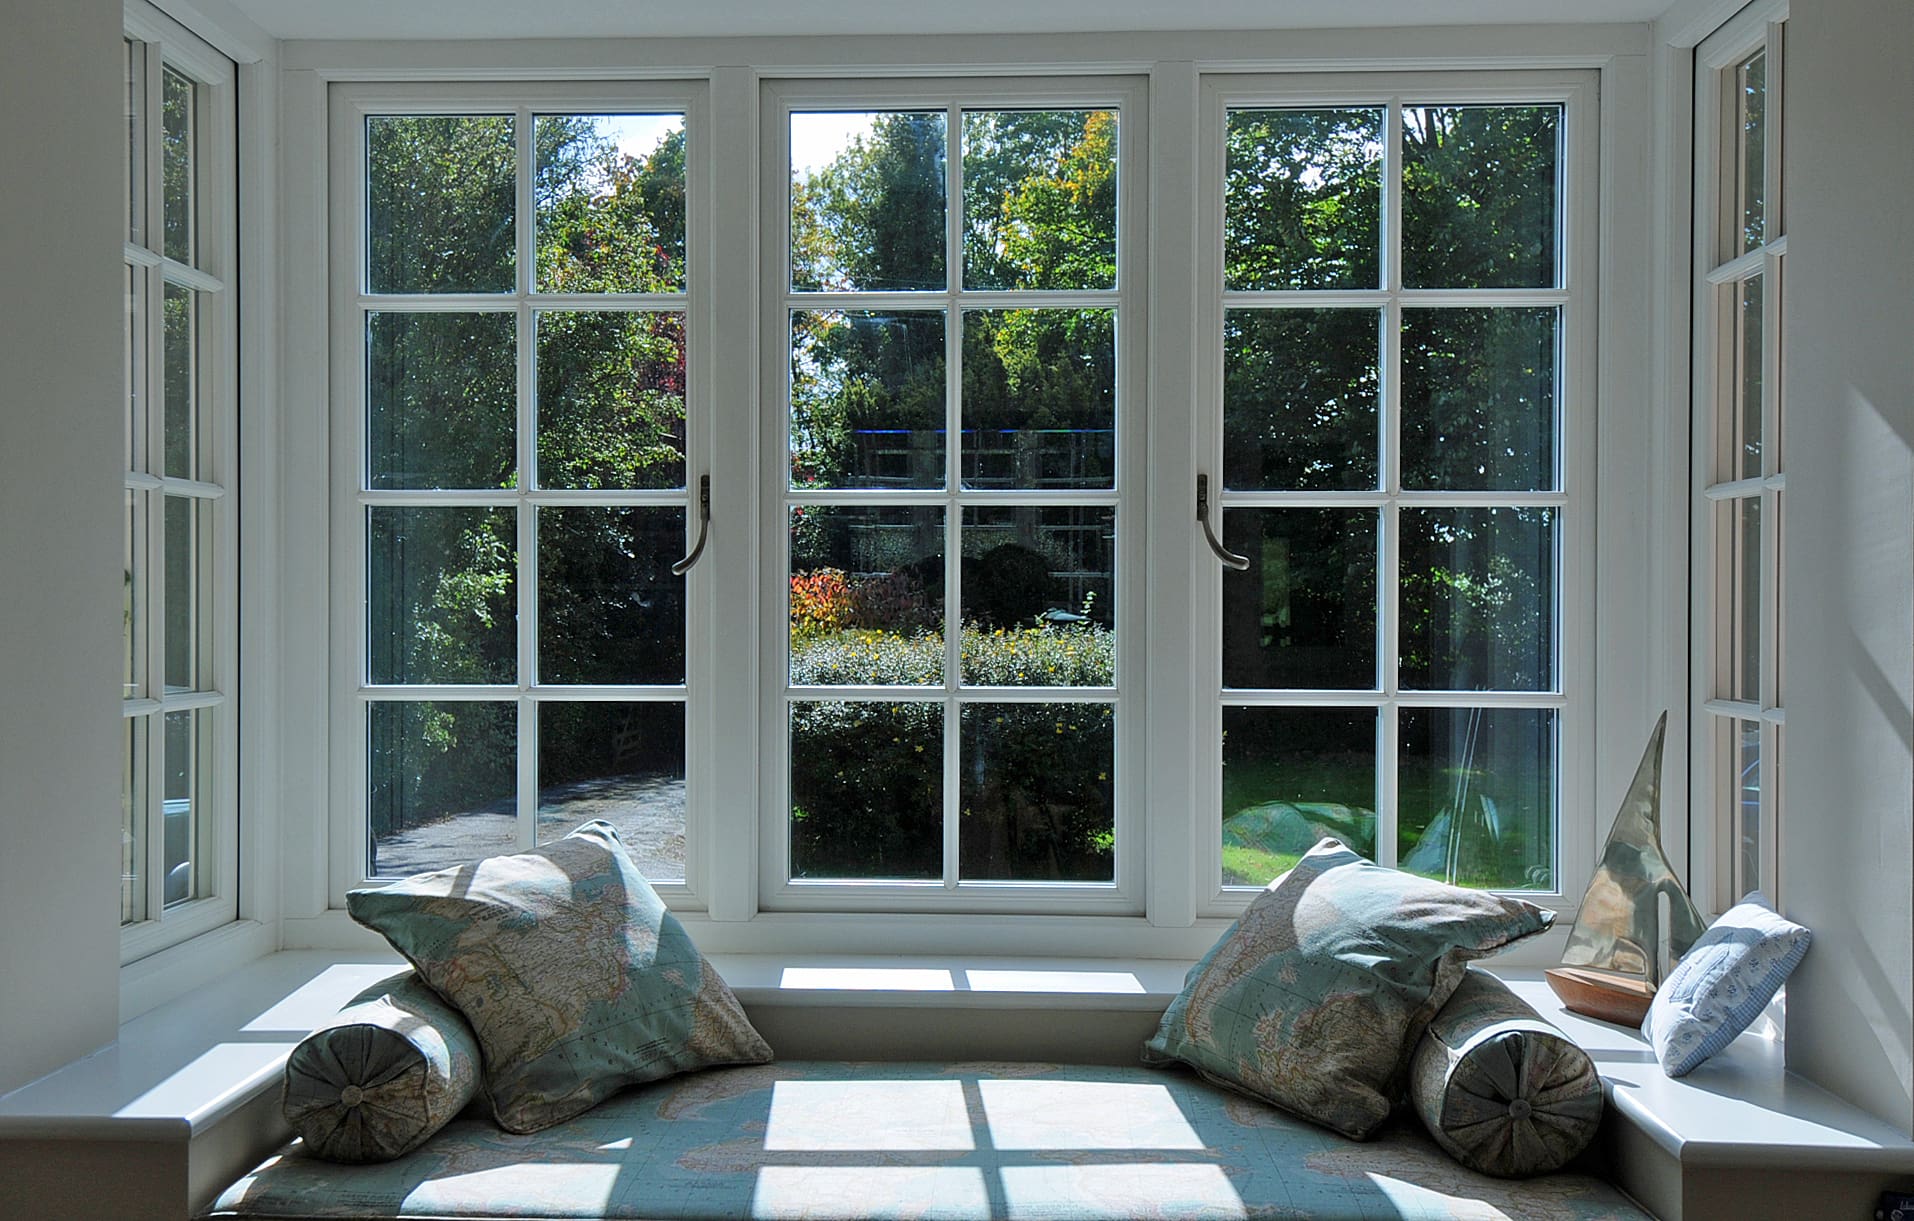 Internal bay window in a traditional style with a window seat and round cushions.